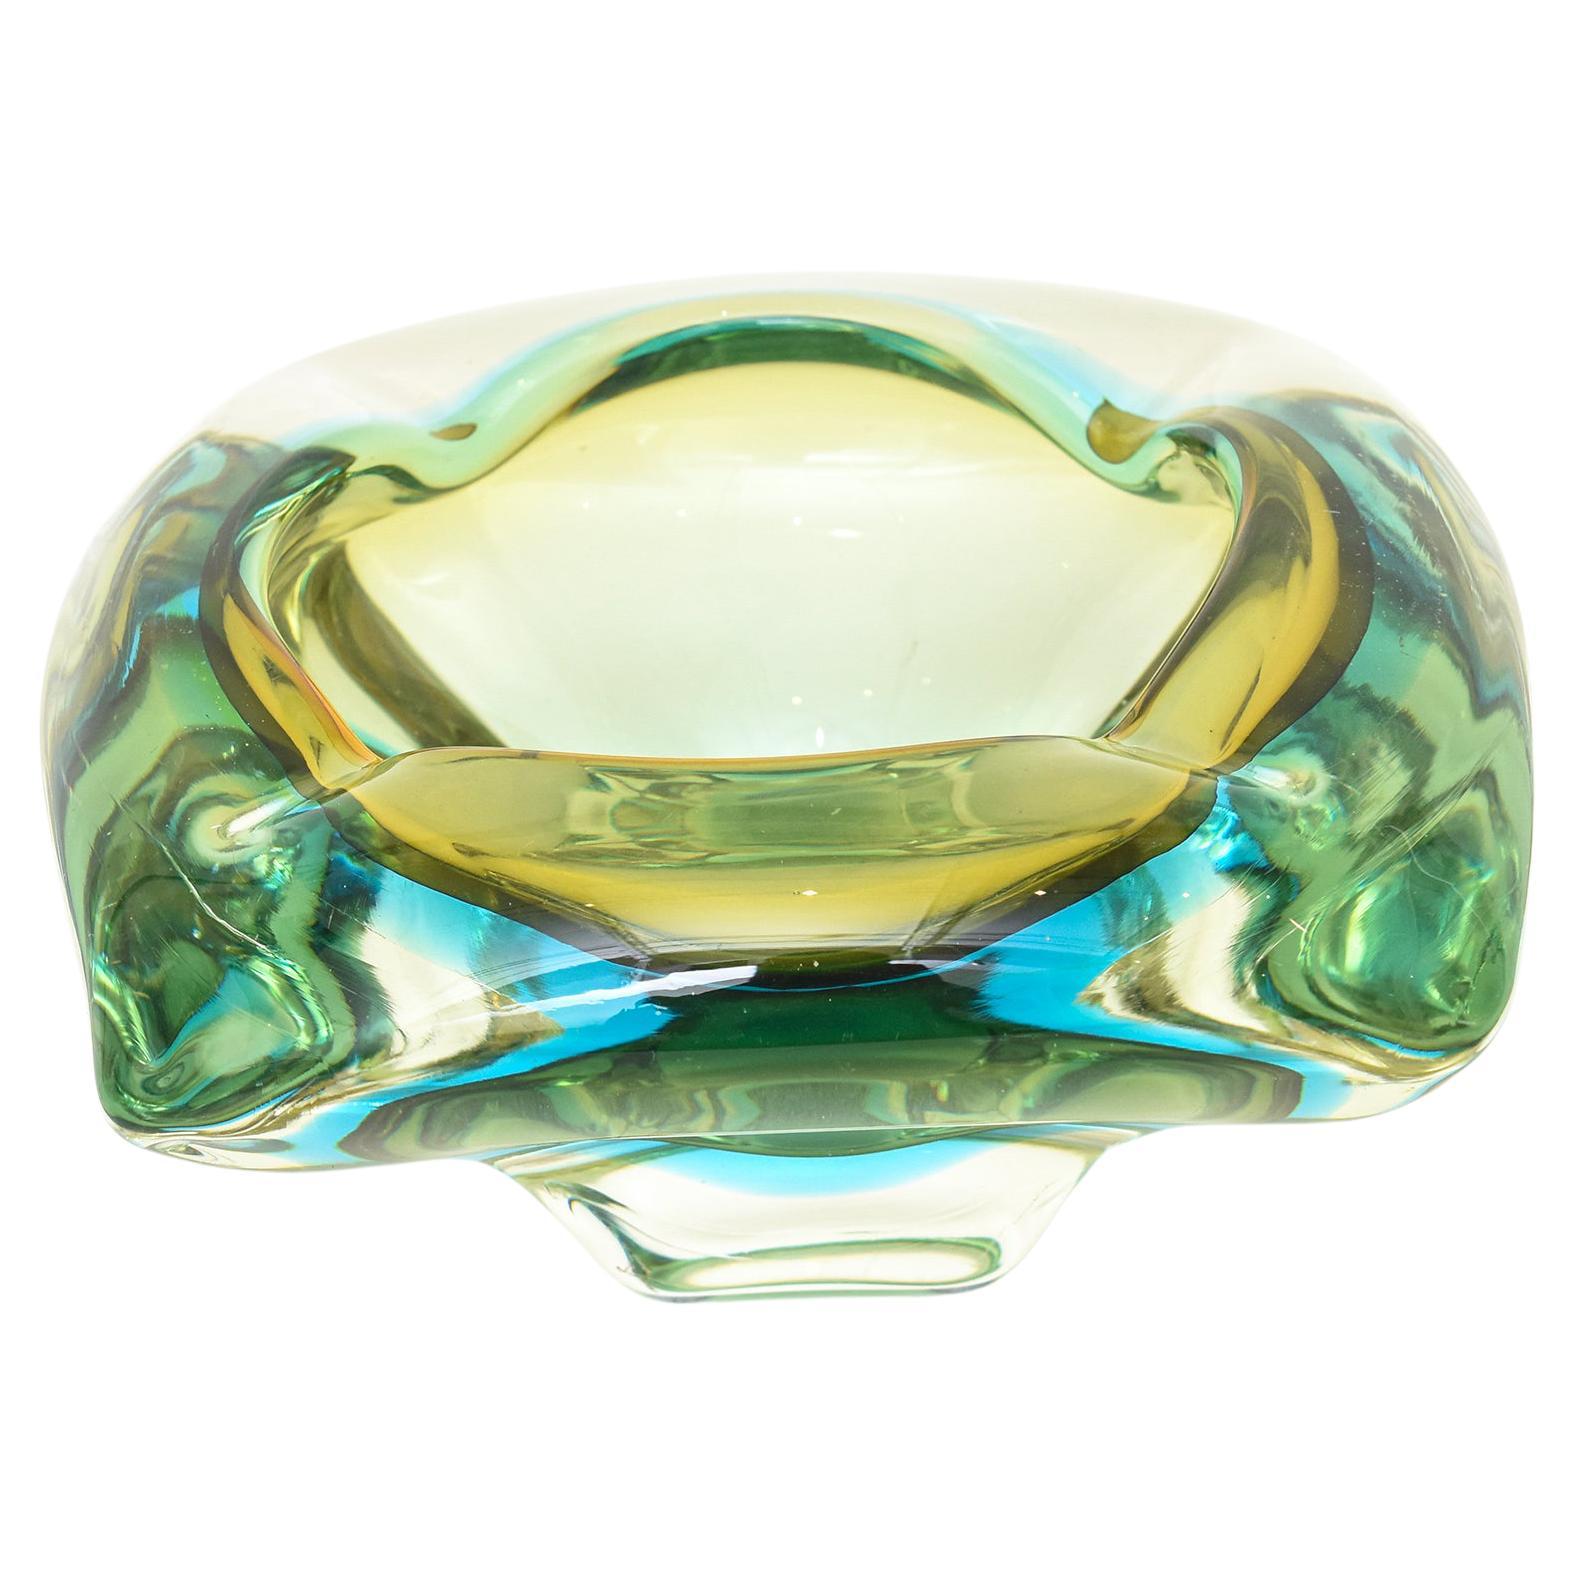 Flavio Poli Vintage Murano Sommerso Turquoise and Green Glass Bowl Or Ashtray